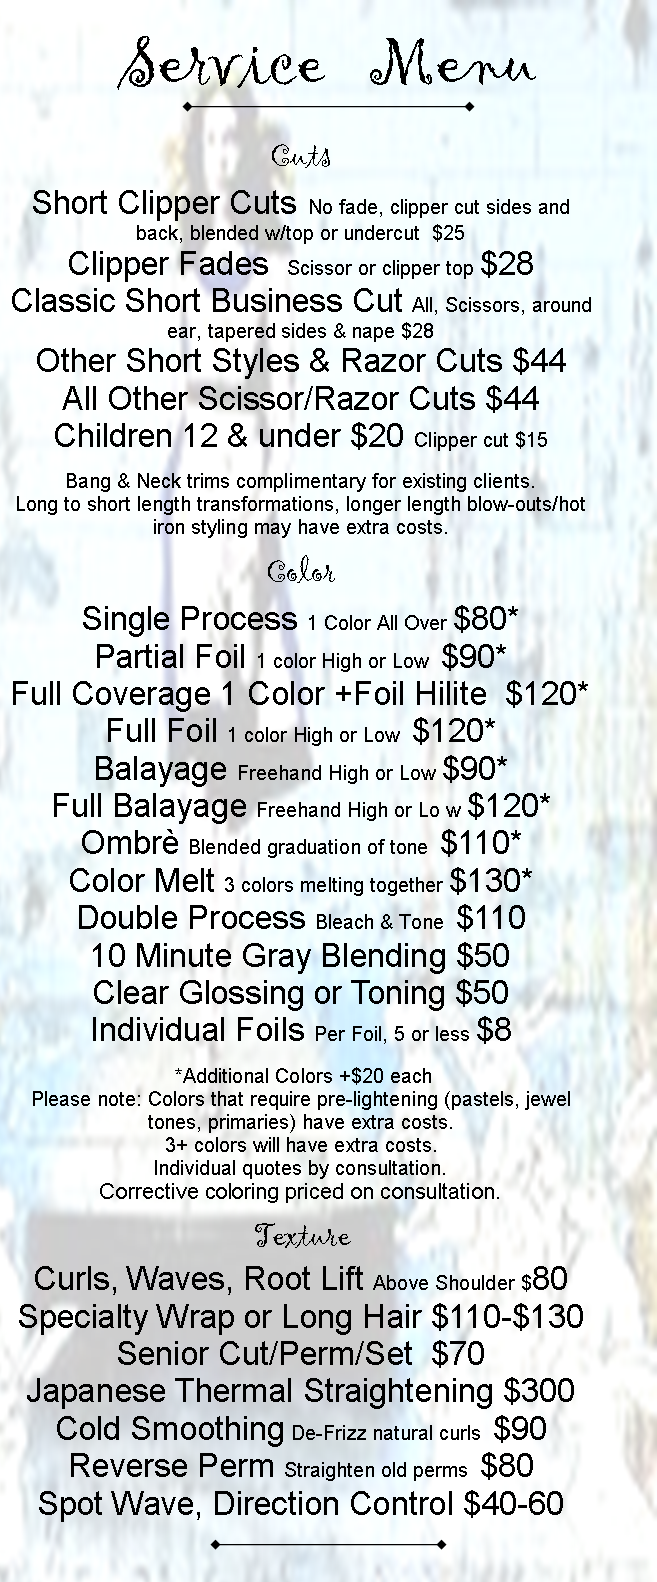 Services offered at Looking Glass Salon